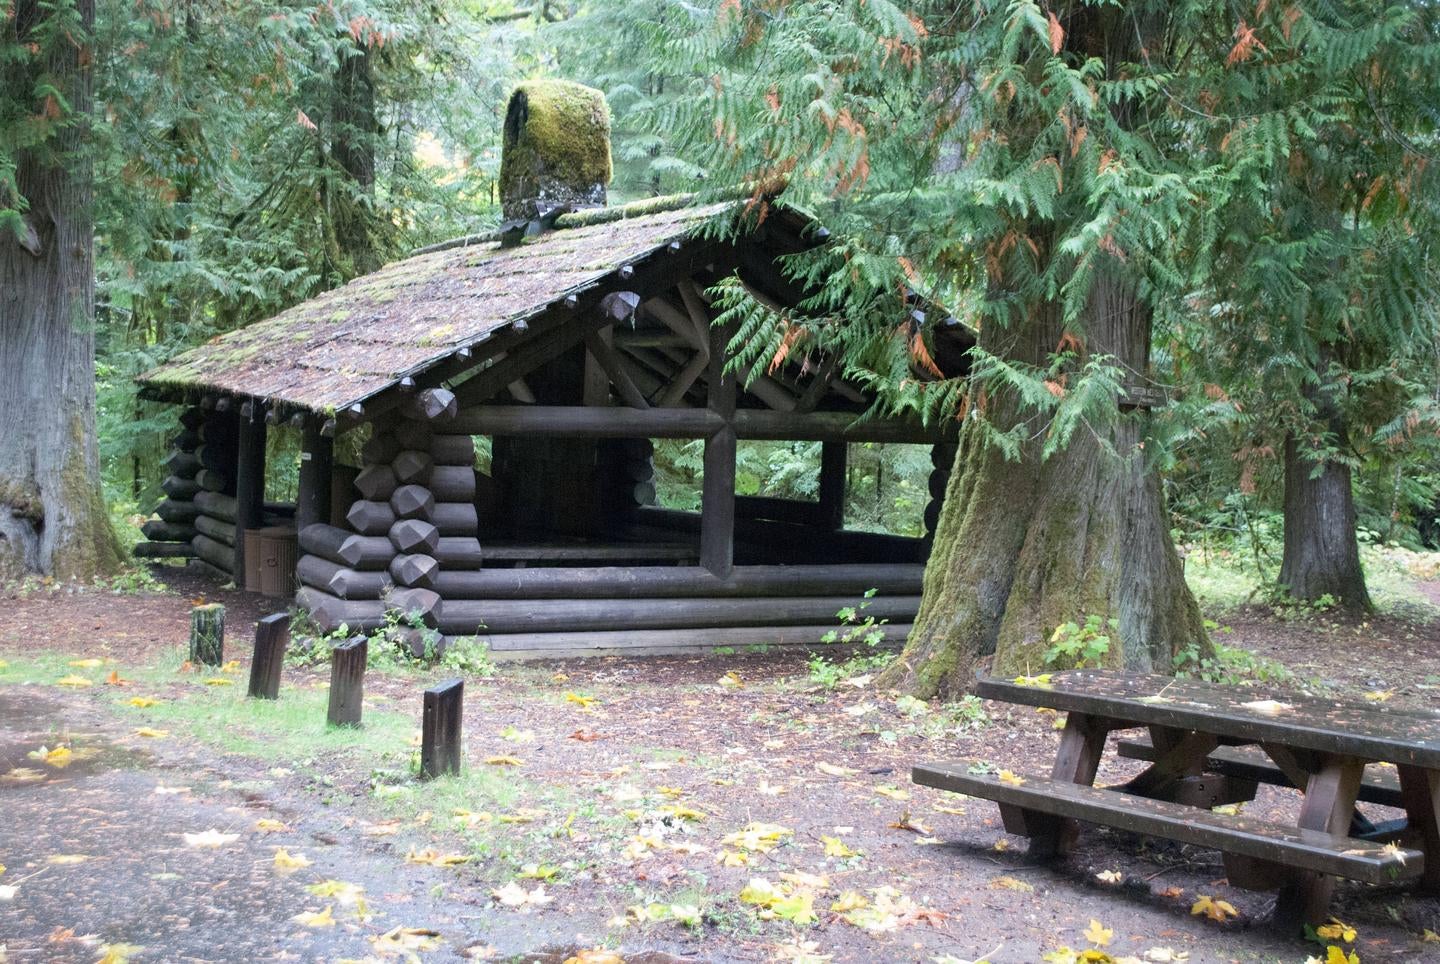 La Wis Wis picnic shelter



Credit: Gifford Pinchot National Forest